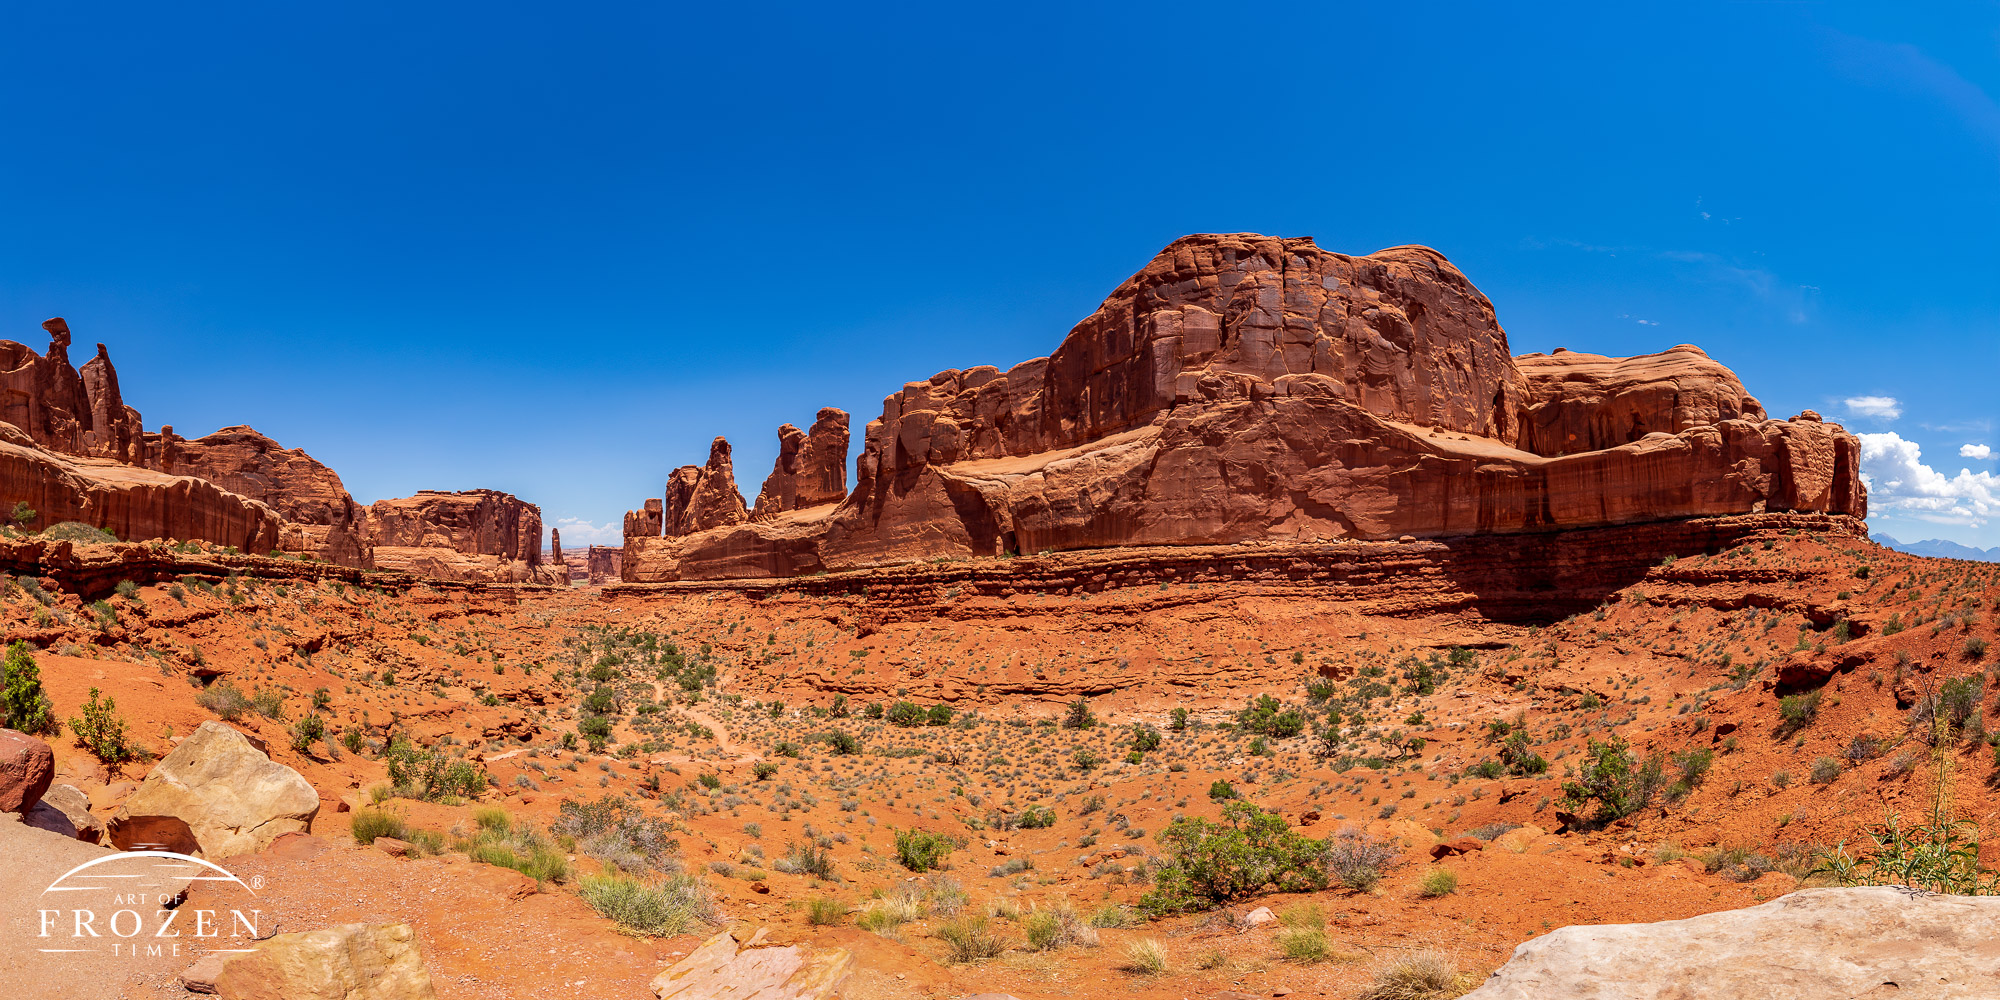 Two opposing walls of Entrada Sandstone several about a half mile long converging at a distance point as light raked down their vertical surfaces.